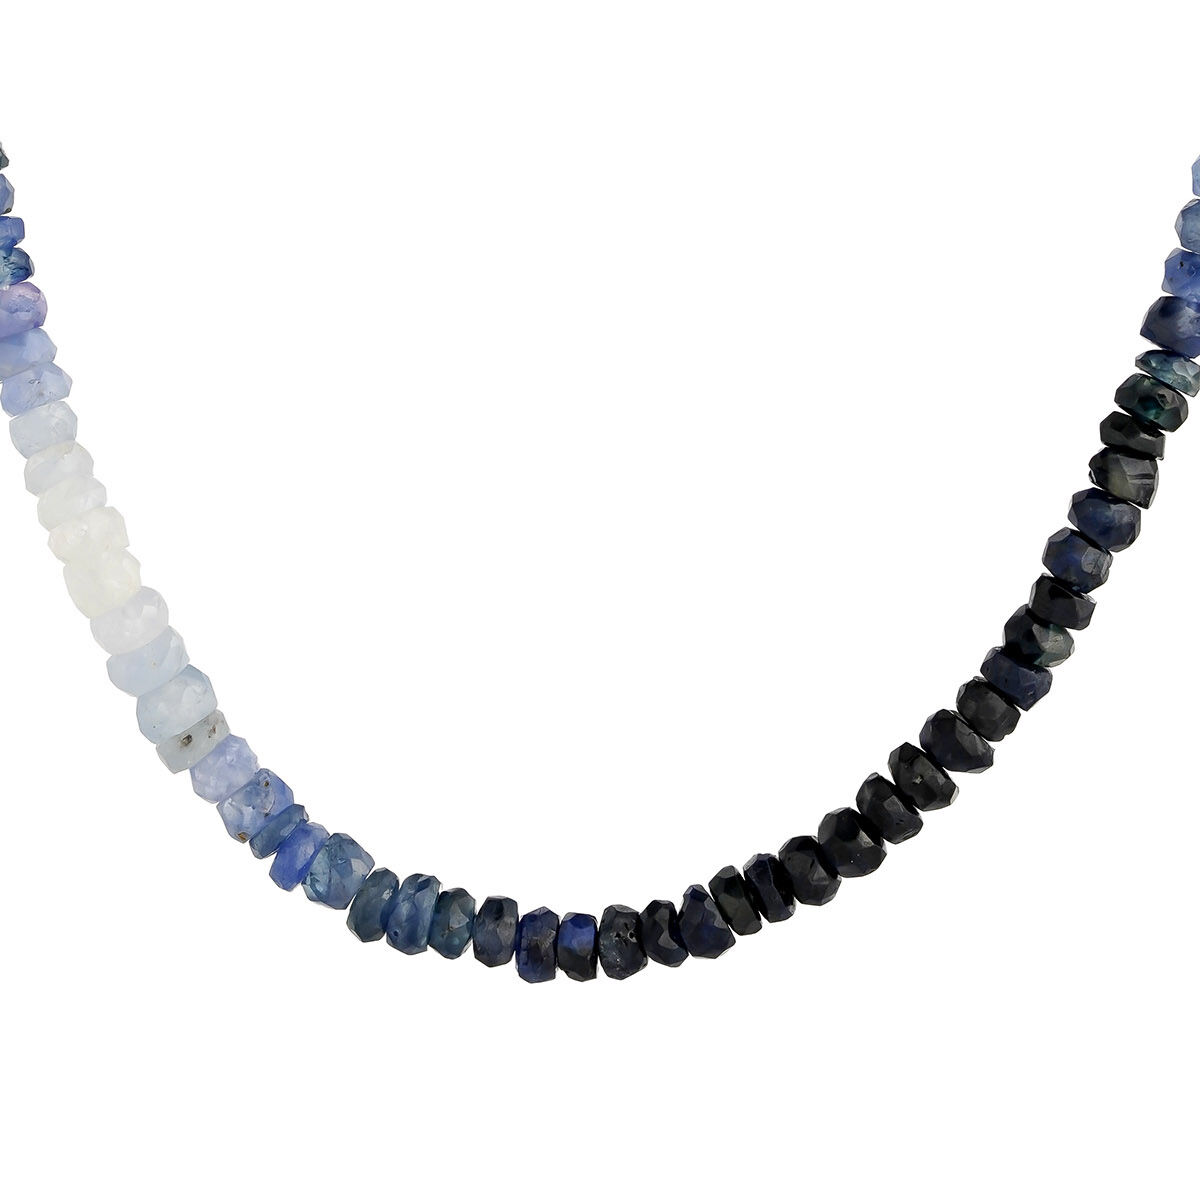 Necklace in 18k yellow gold-plated silver with blue and white sapphire beads, J04922-02-MBS, hi-res